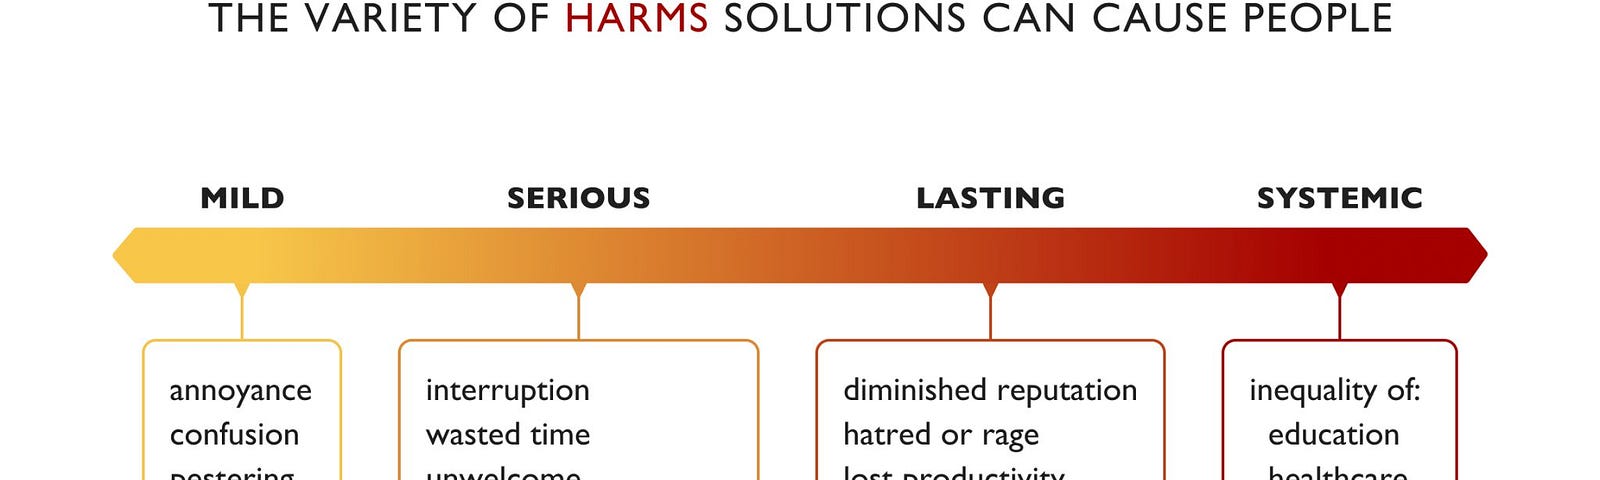 Left-right horizontal arrow with four labels on it denoting four “levels” of harm: mild, serious, lasting, systemic. This diagram is in flux, and I’d love feedback on the wording and labels. (For example, “mild harm” contains harms like annoyance, confusion, being pestered, and frustration. Maybe that’s not “mild.”